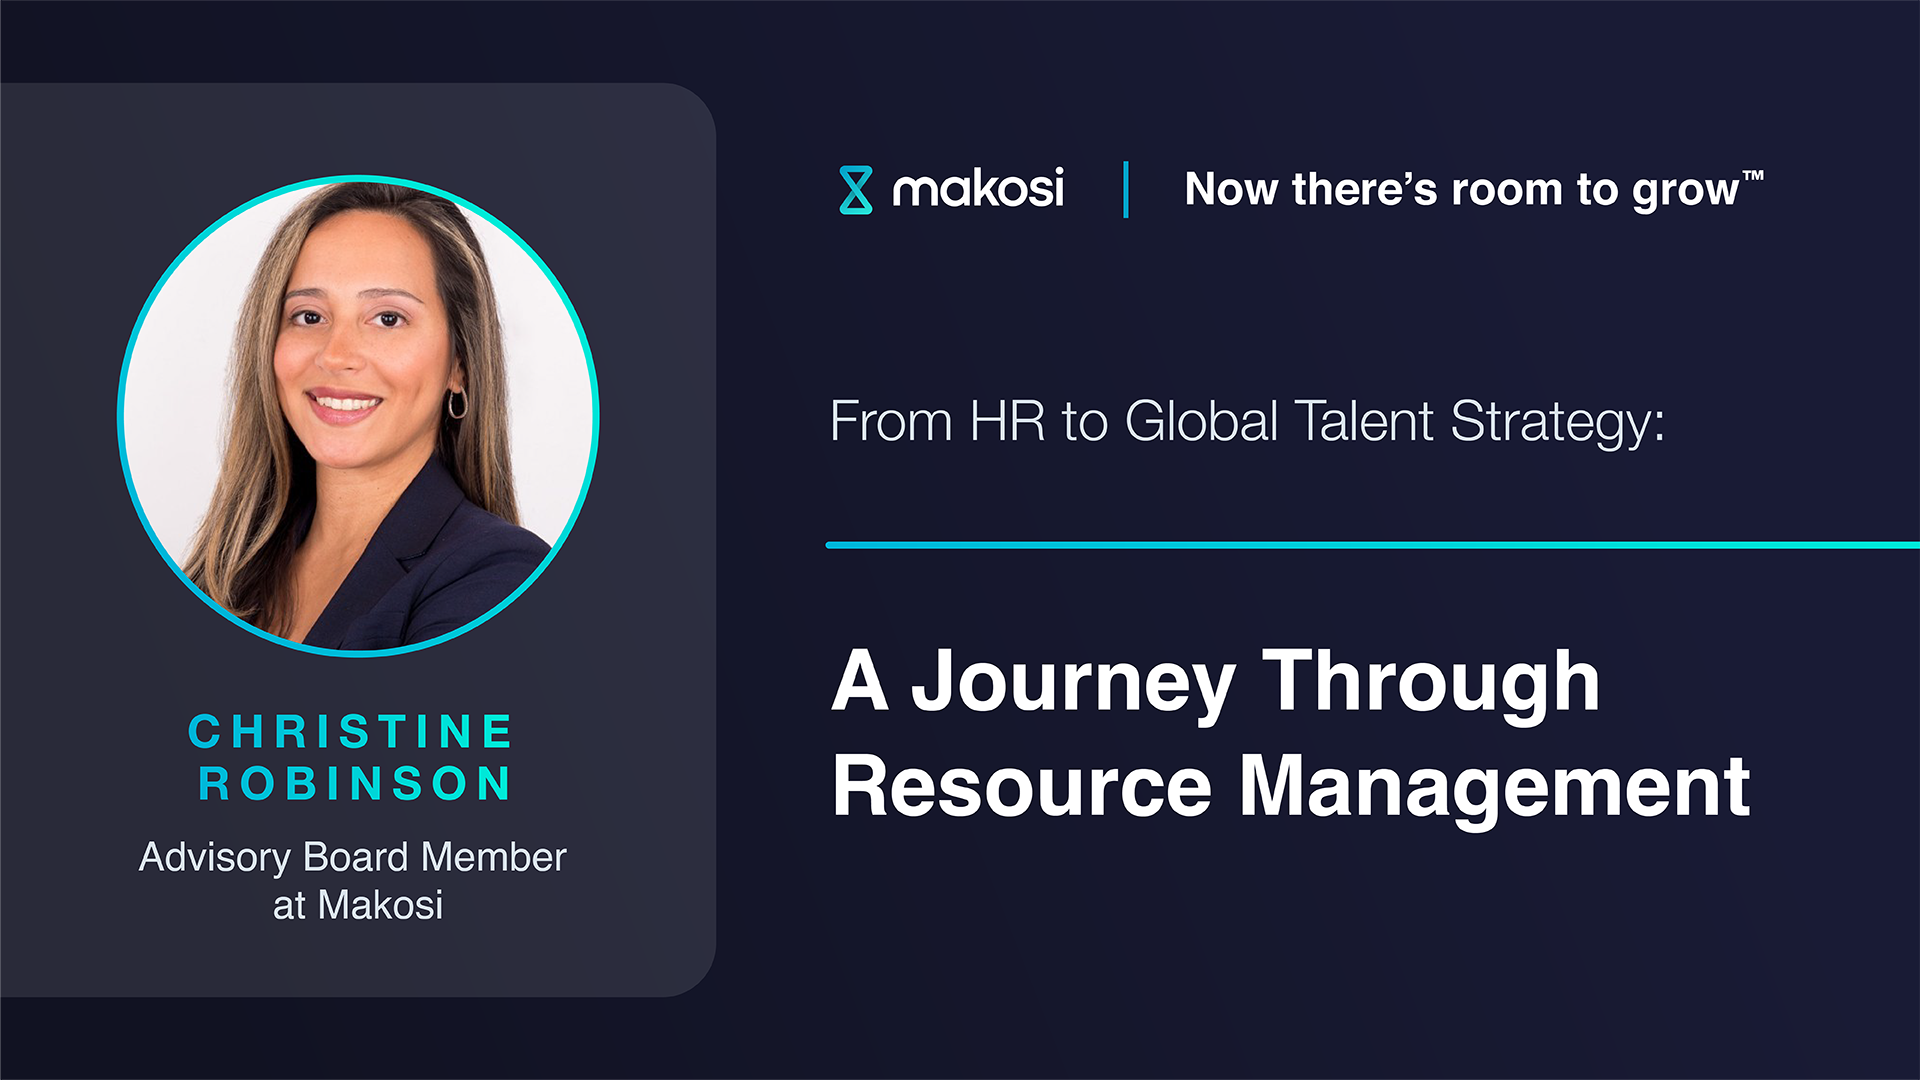 From HR to Global Talent Strategy: A Journey Through Resource Management